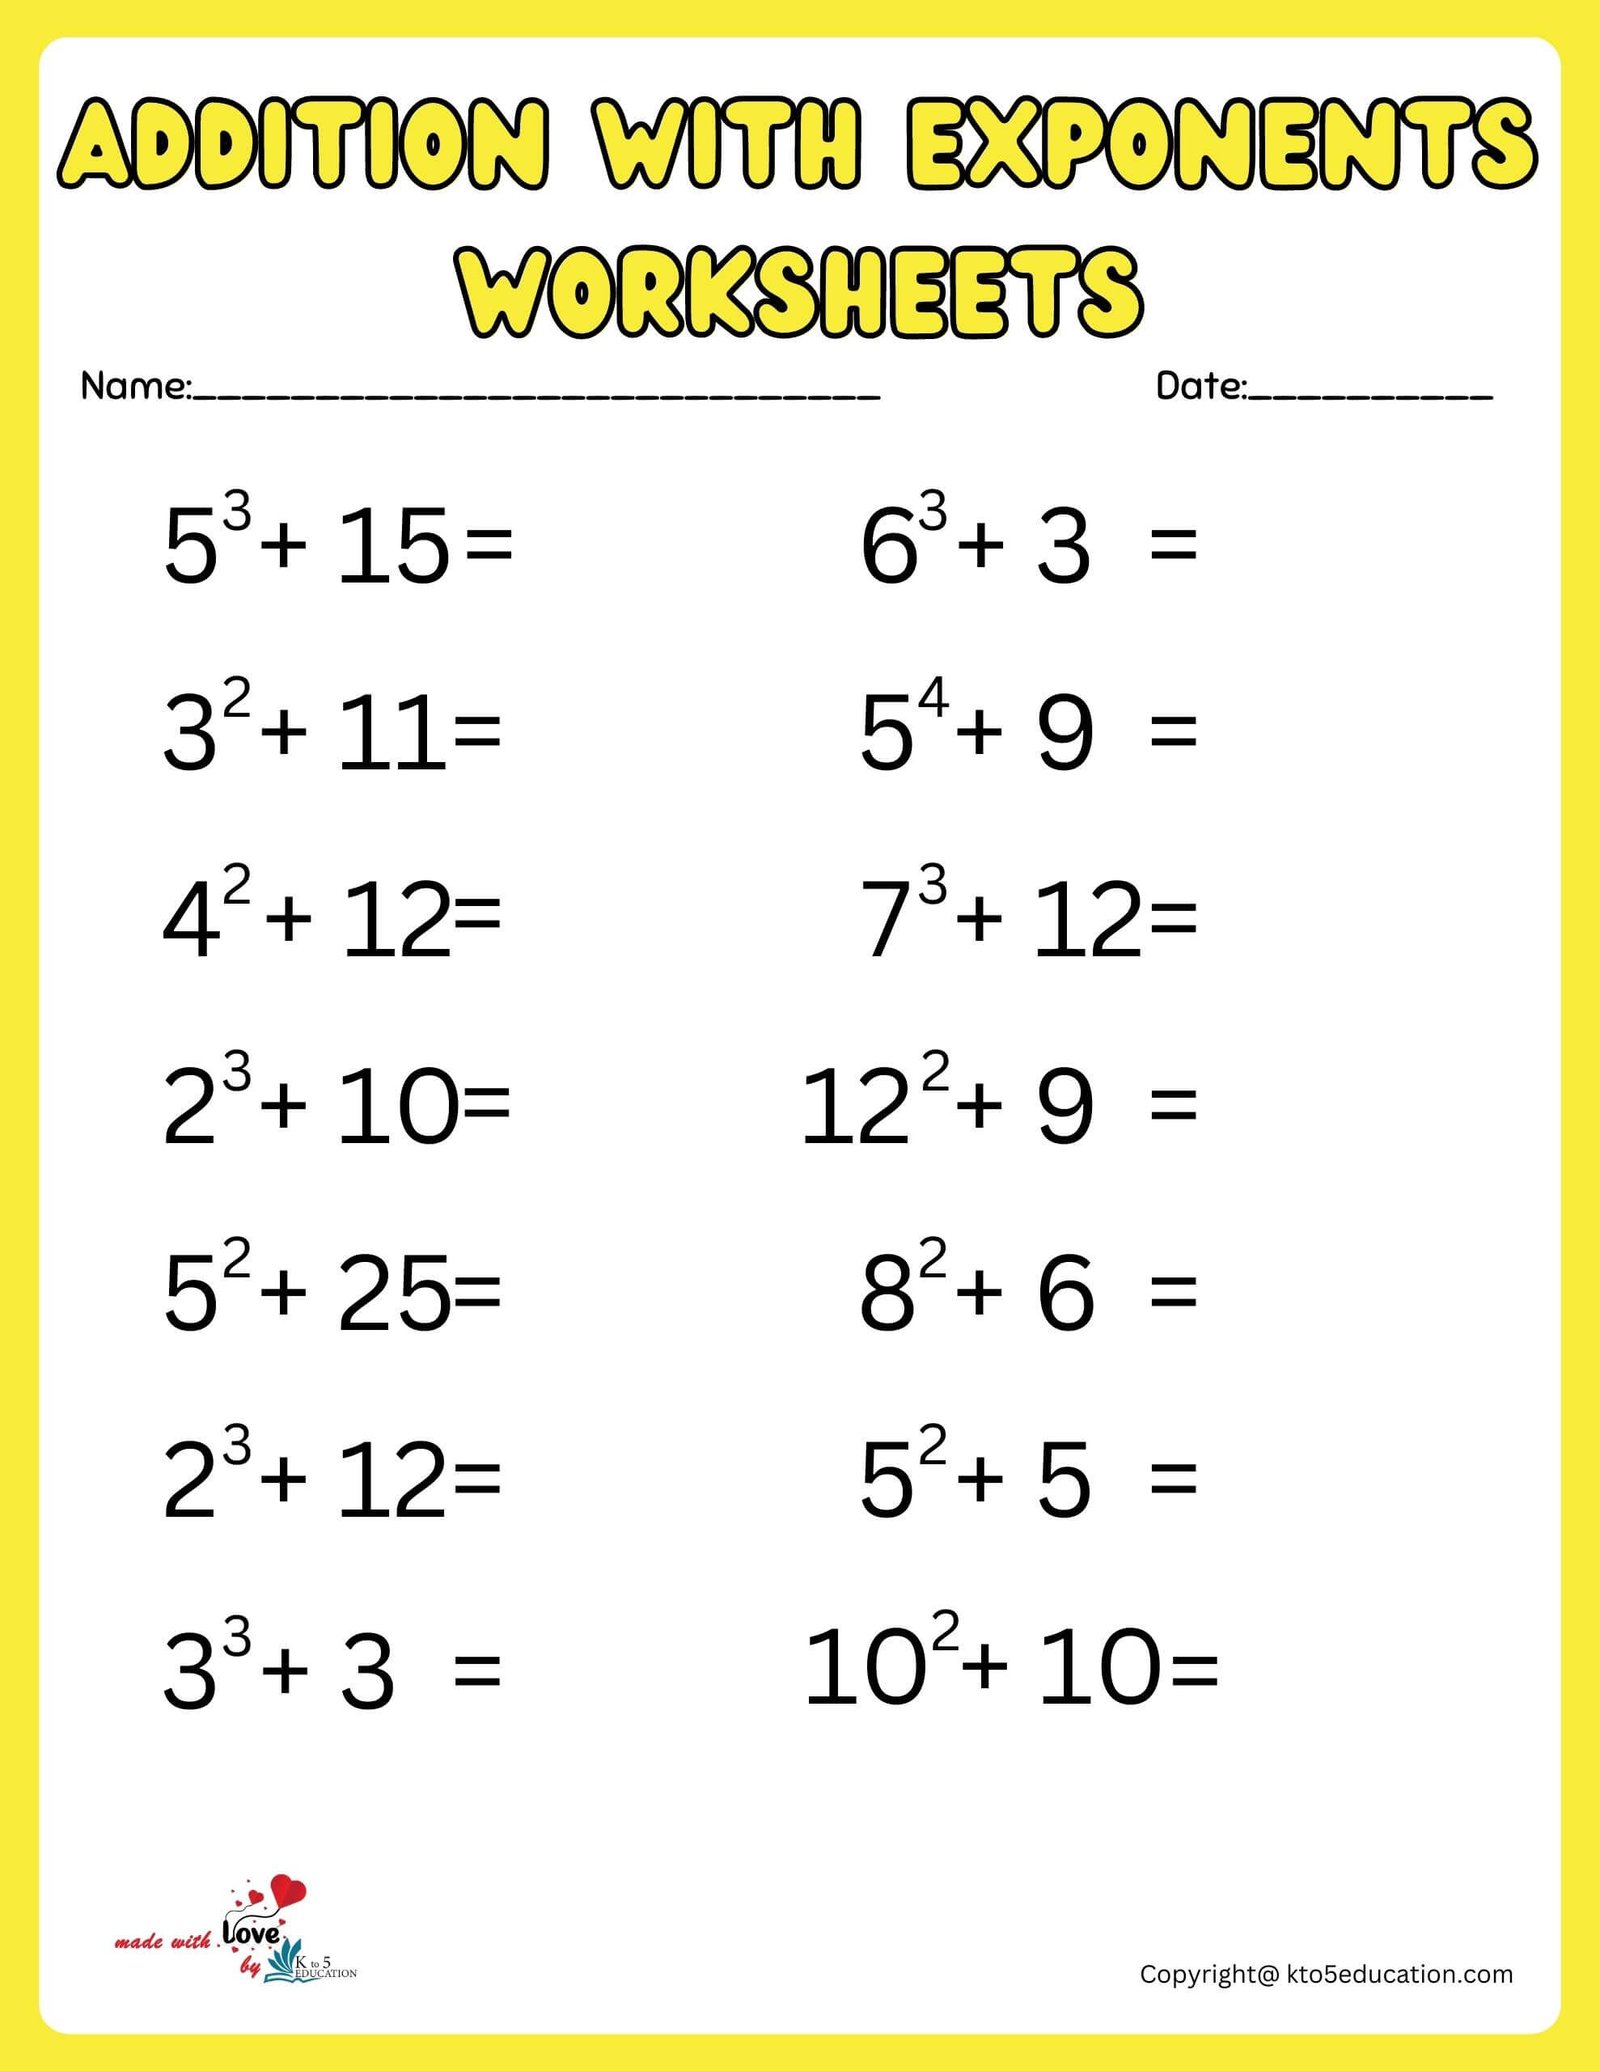 Addition With Exponents Worksheet For Kids